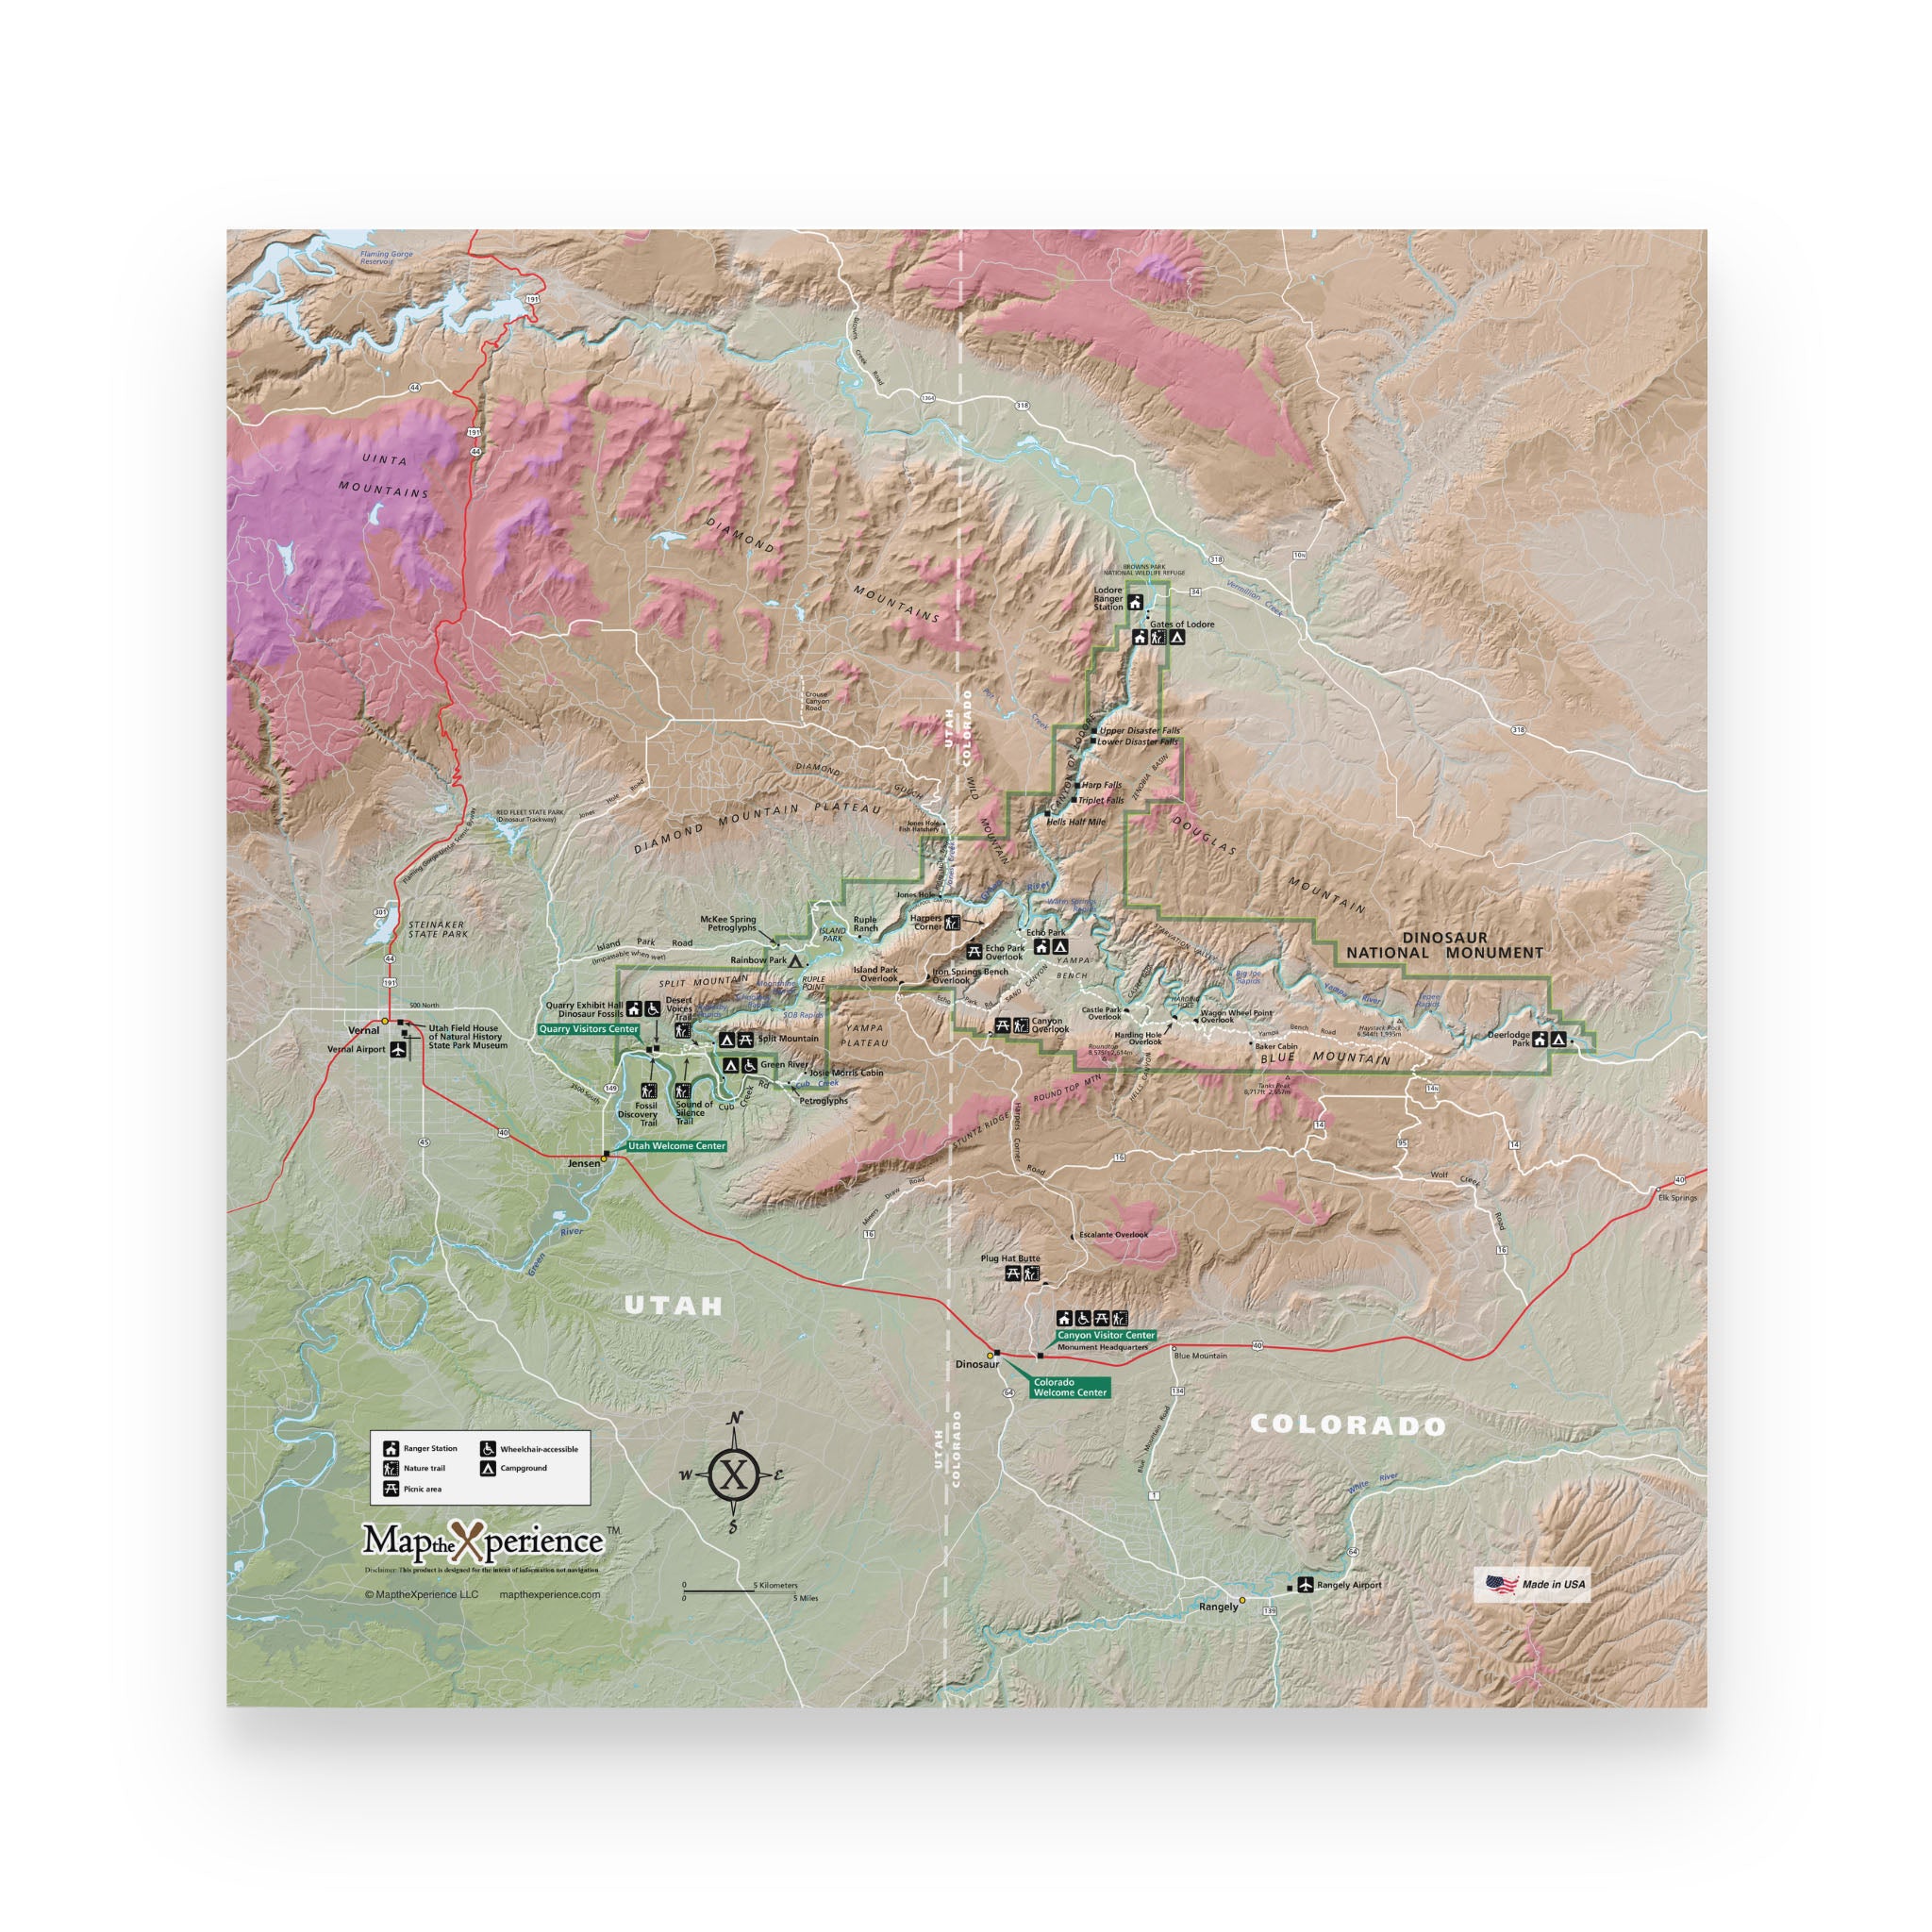 Dinosaur National Monument Map Poster | Free Mobile Map